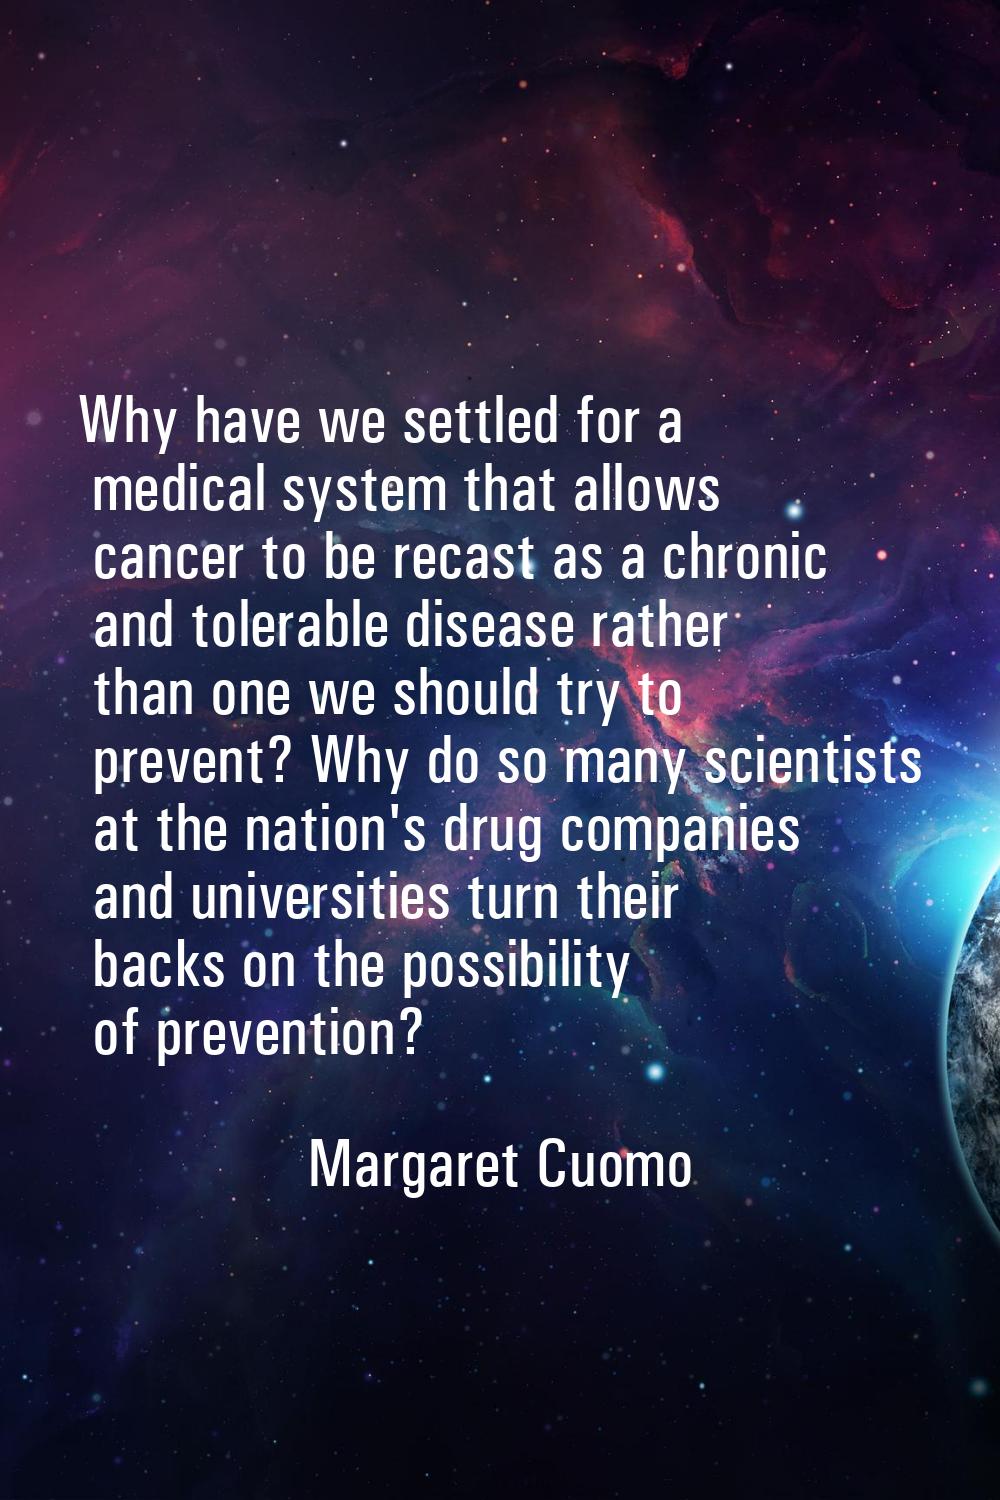 Why have we settled for a medical system that allows cancer to be recast as a chronic and tolerable